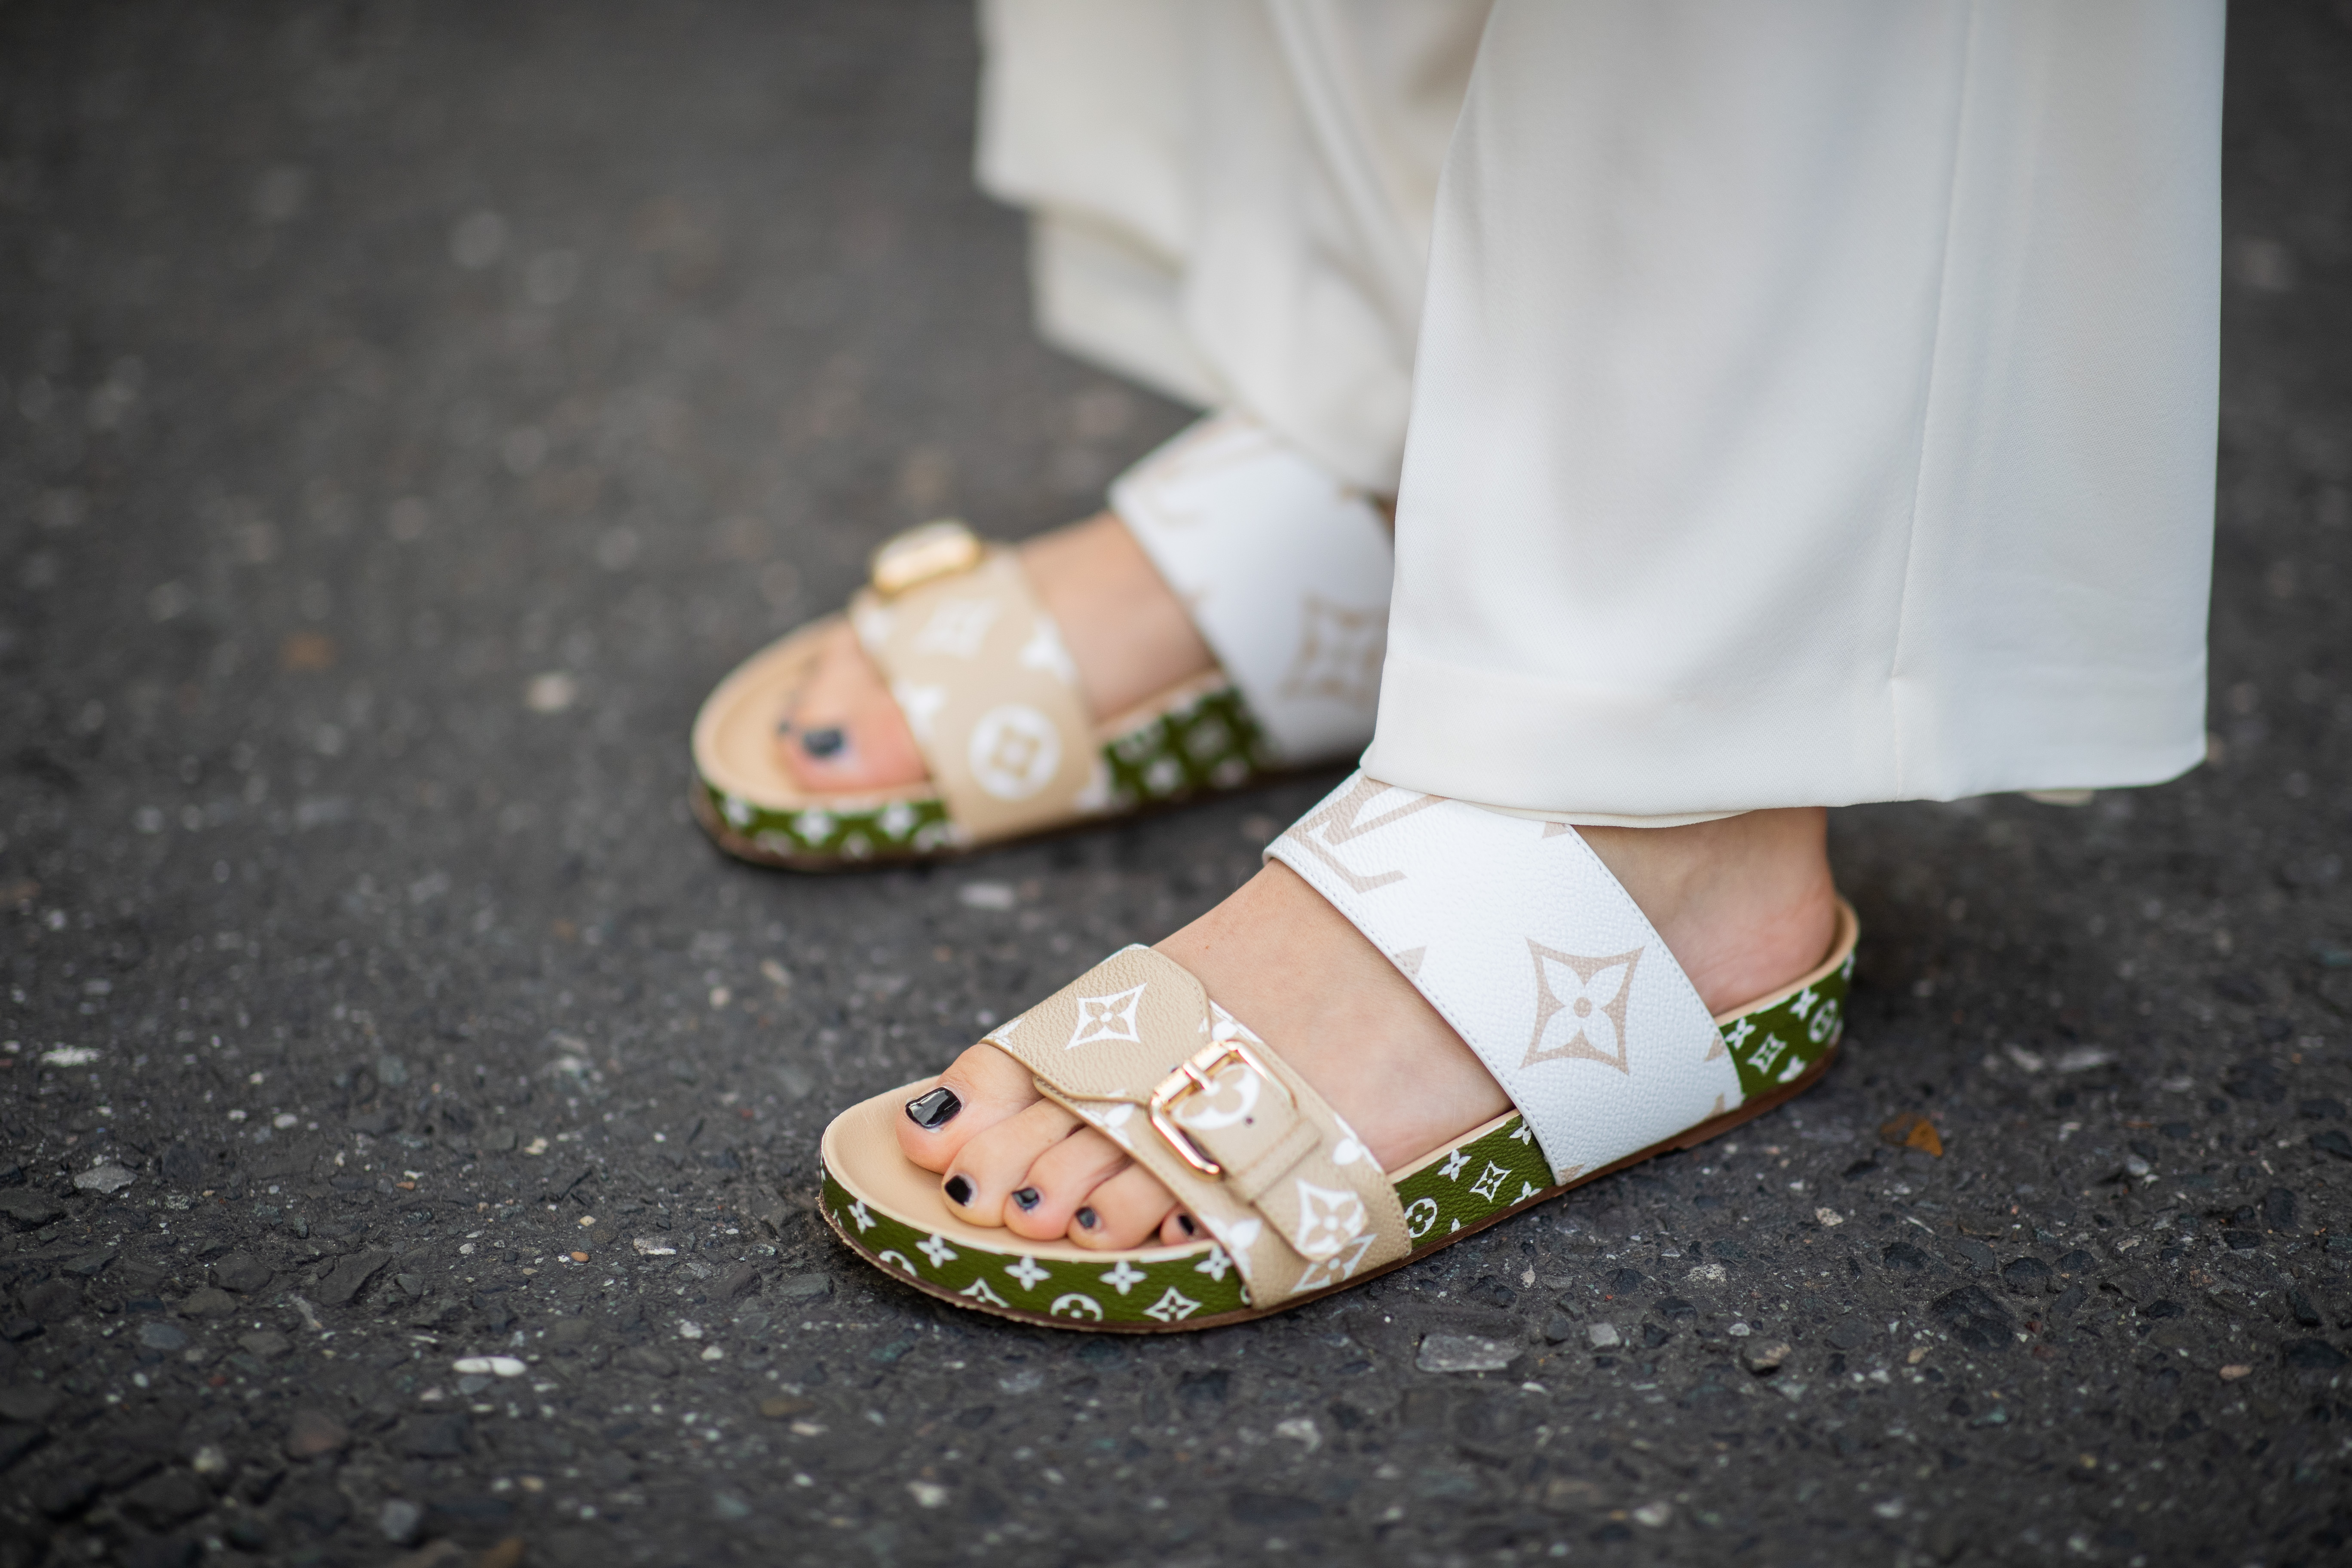 Louis Vuitton's Birkenstock-esque sandal will have you wishing for summer -  Fashion Journal